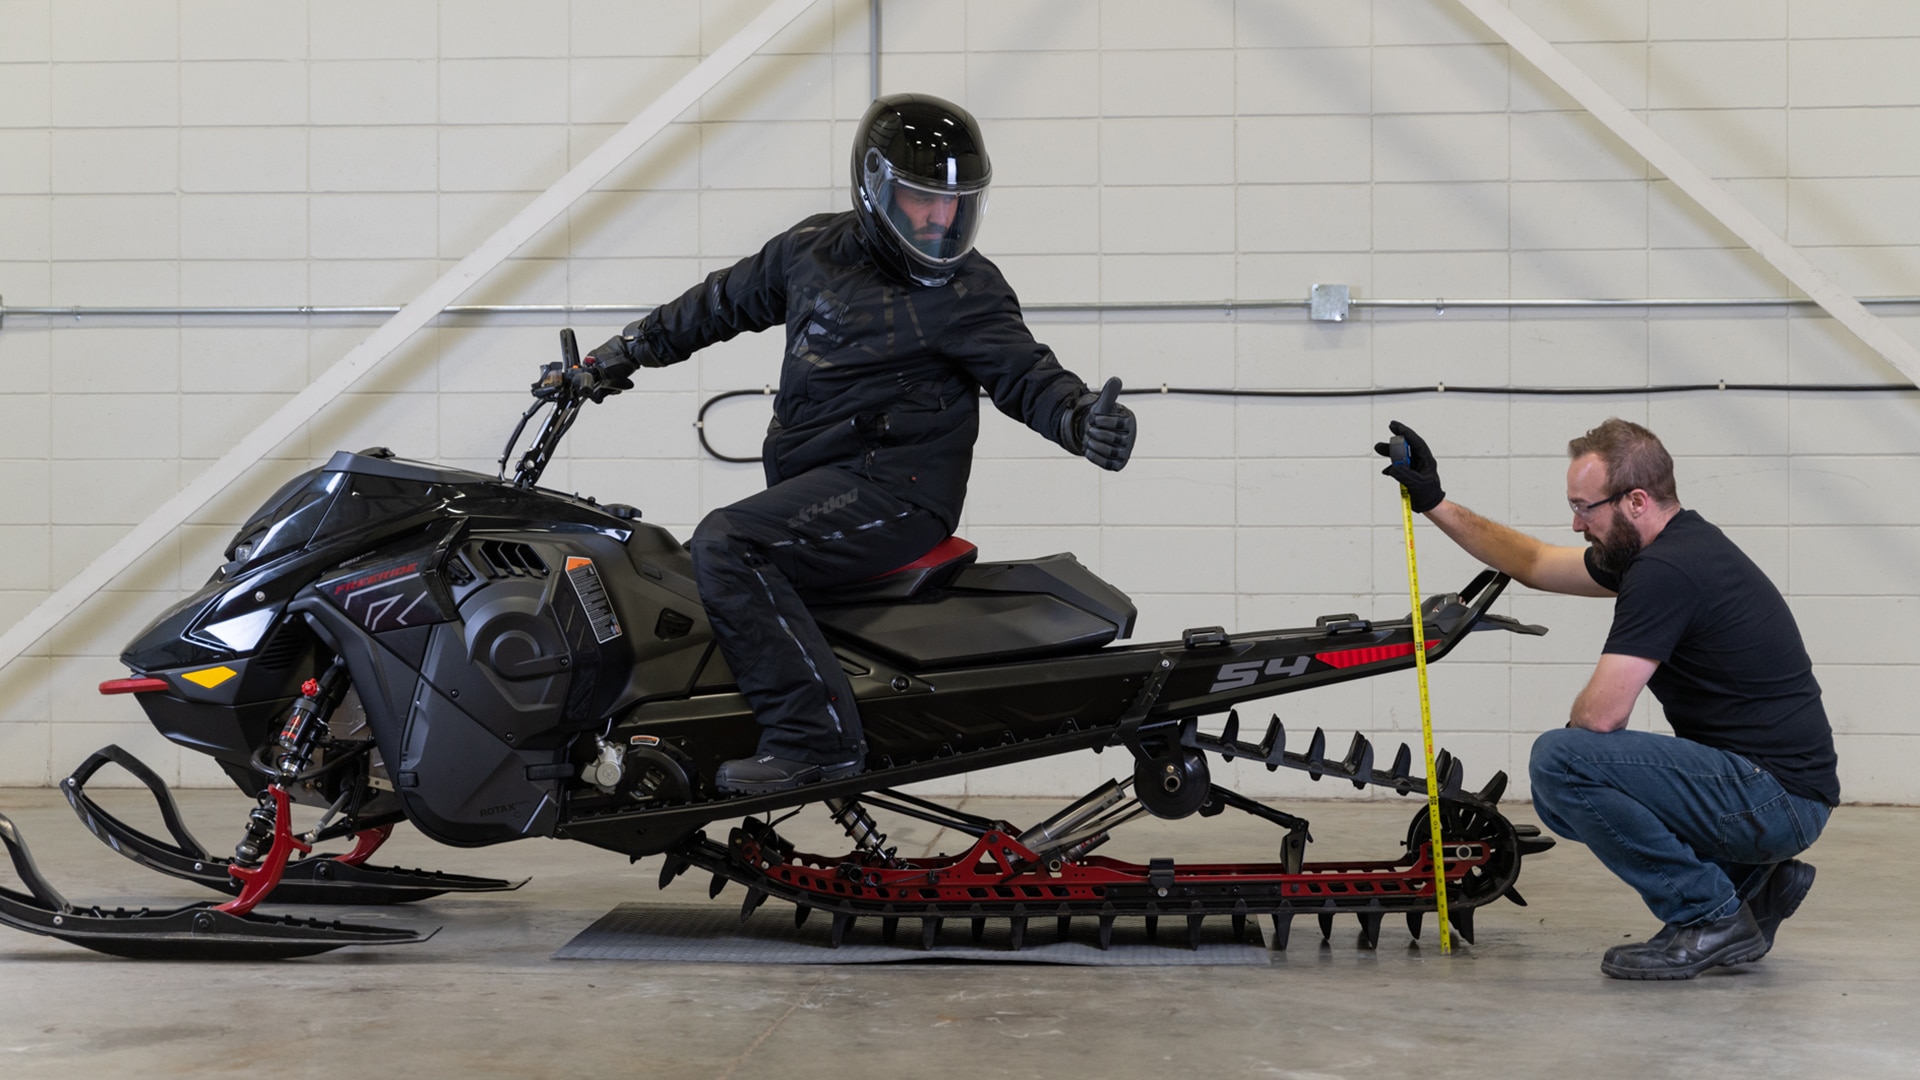 Ski-Doo rider on vehicle doing a thumbs up, while his friend measures the height of the rear bumper